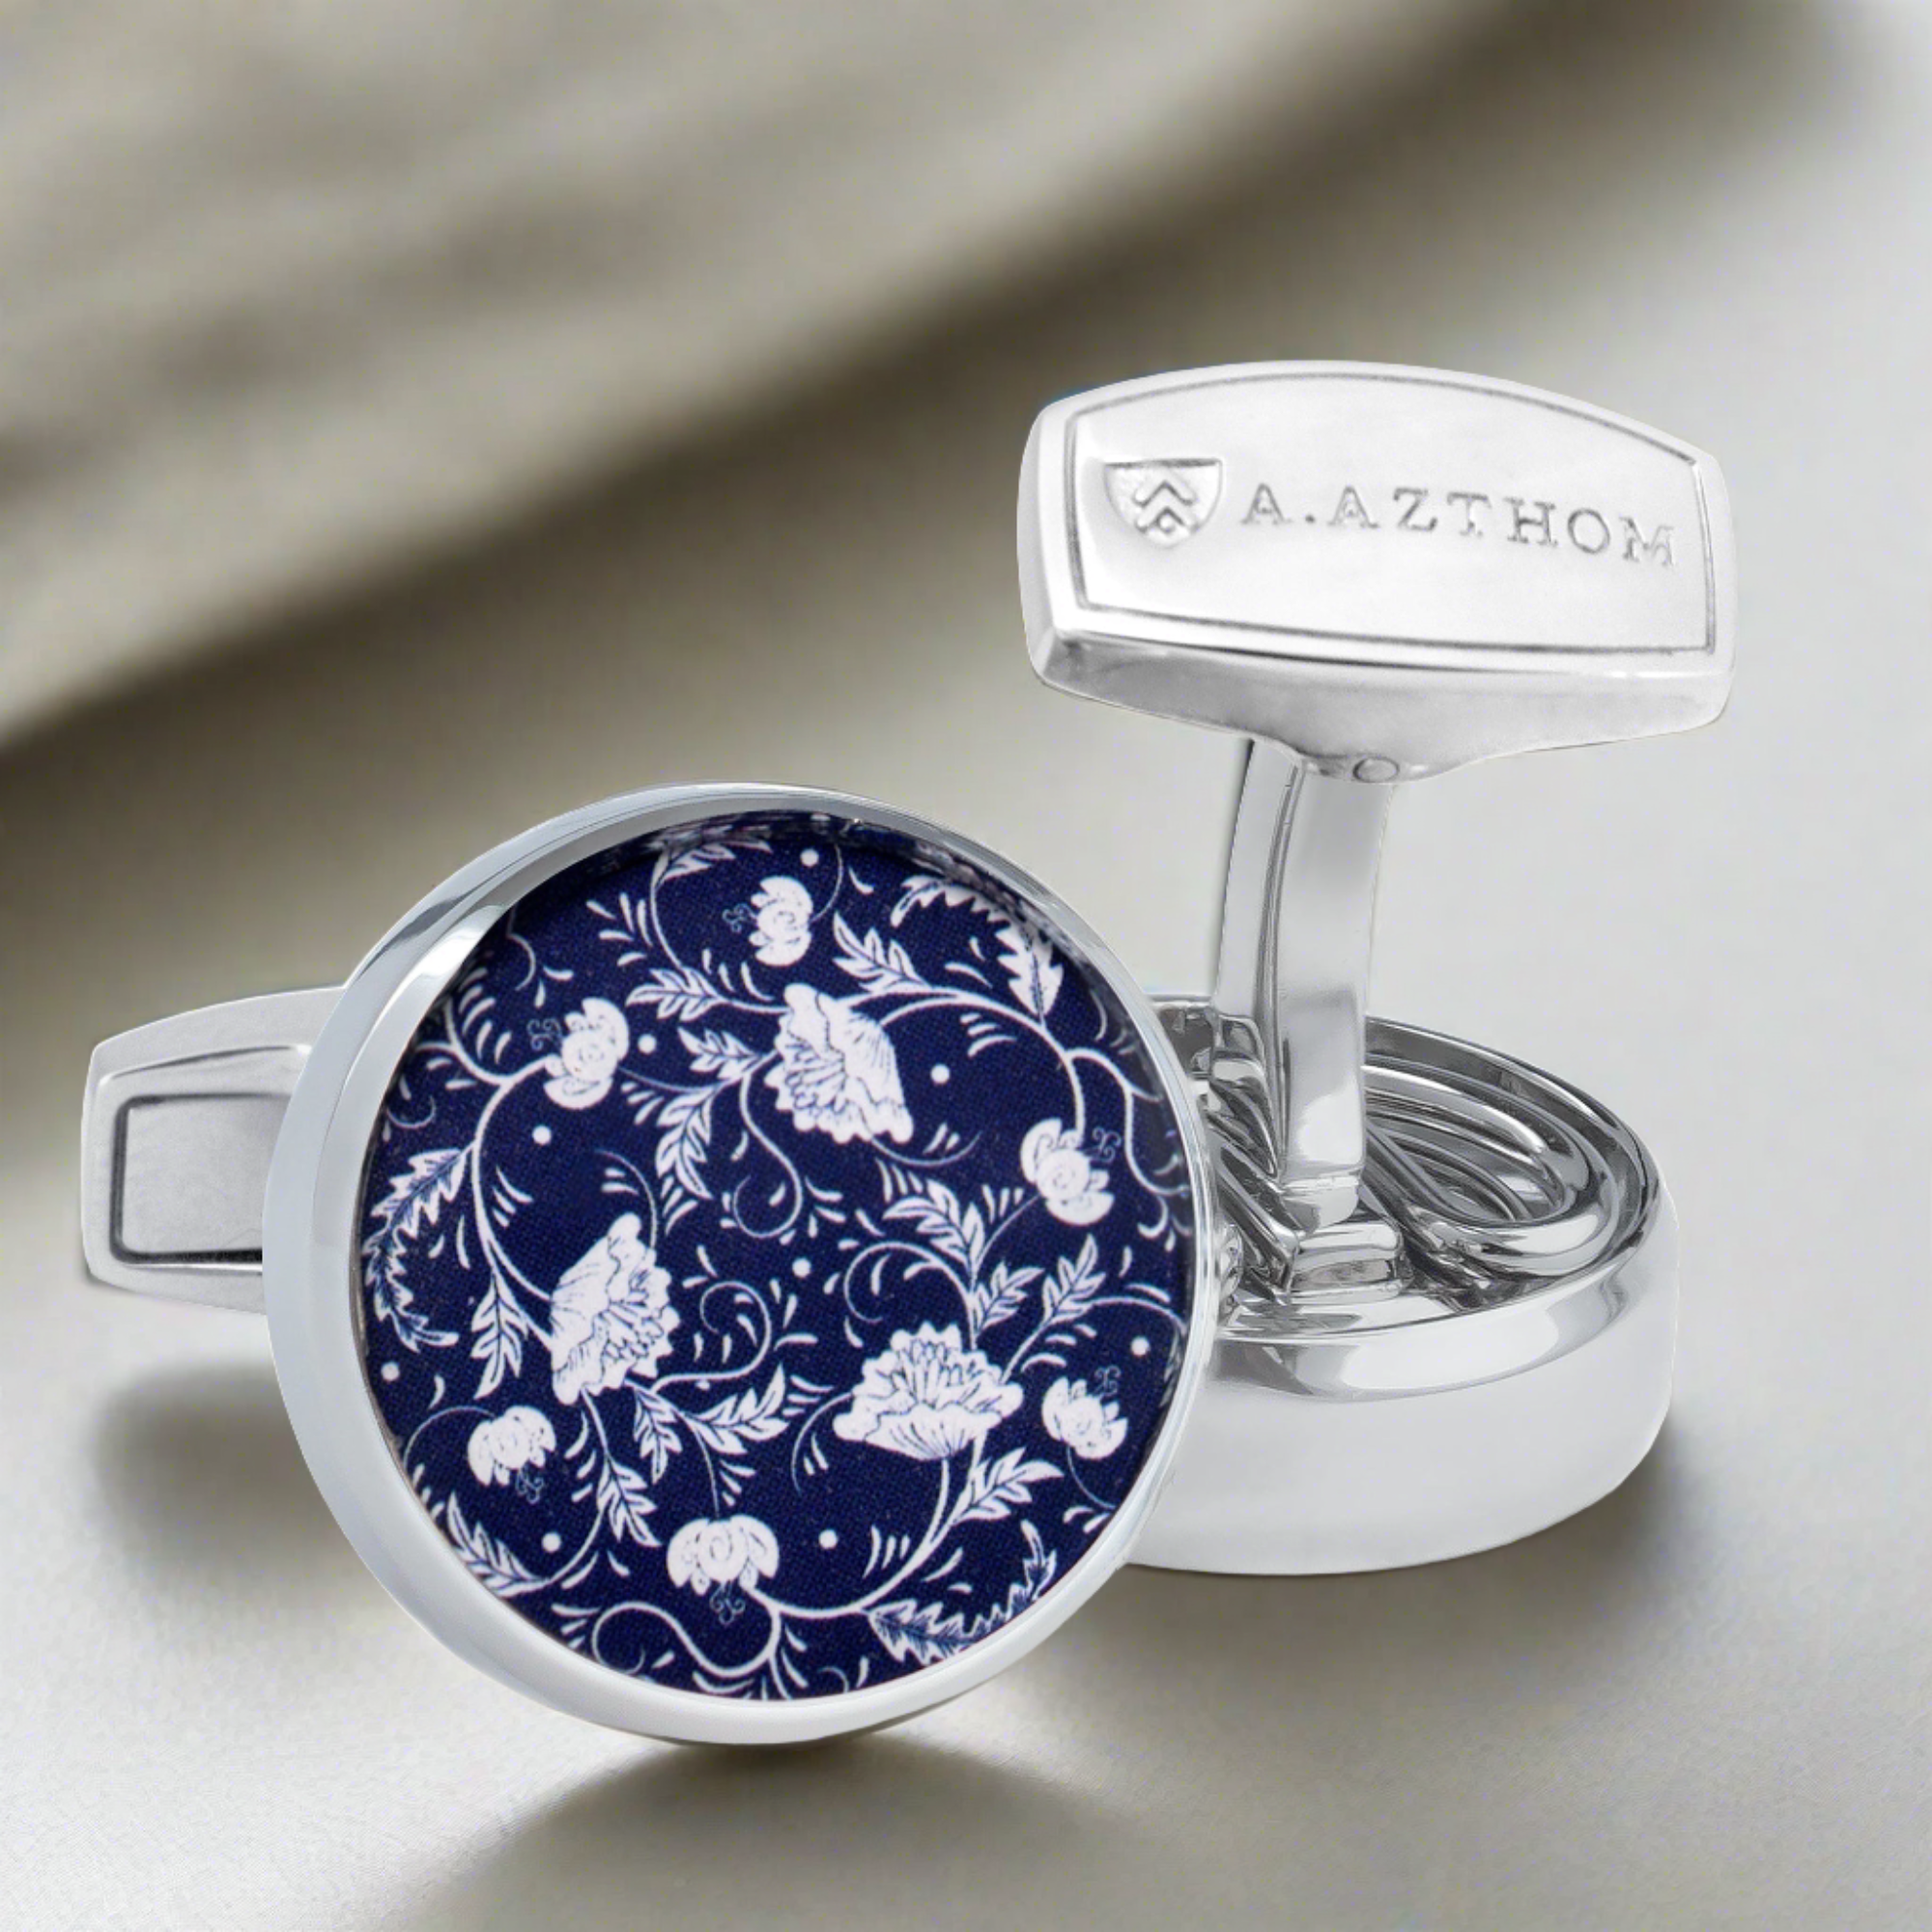 Peranakan Cufflinks with Clip-on Button Covers